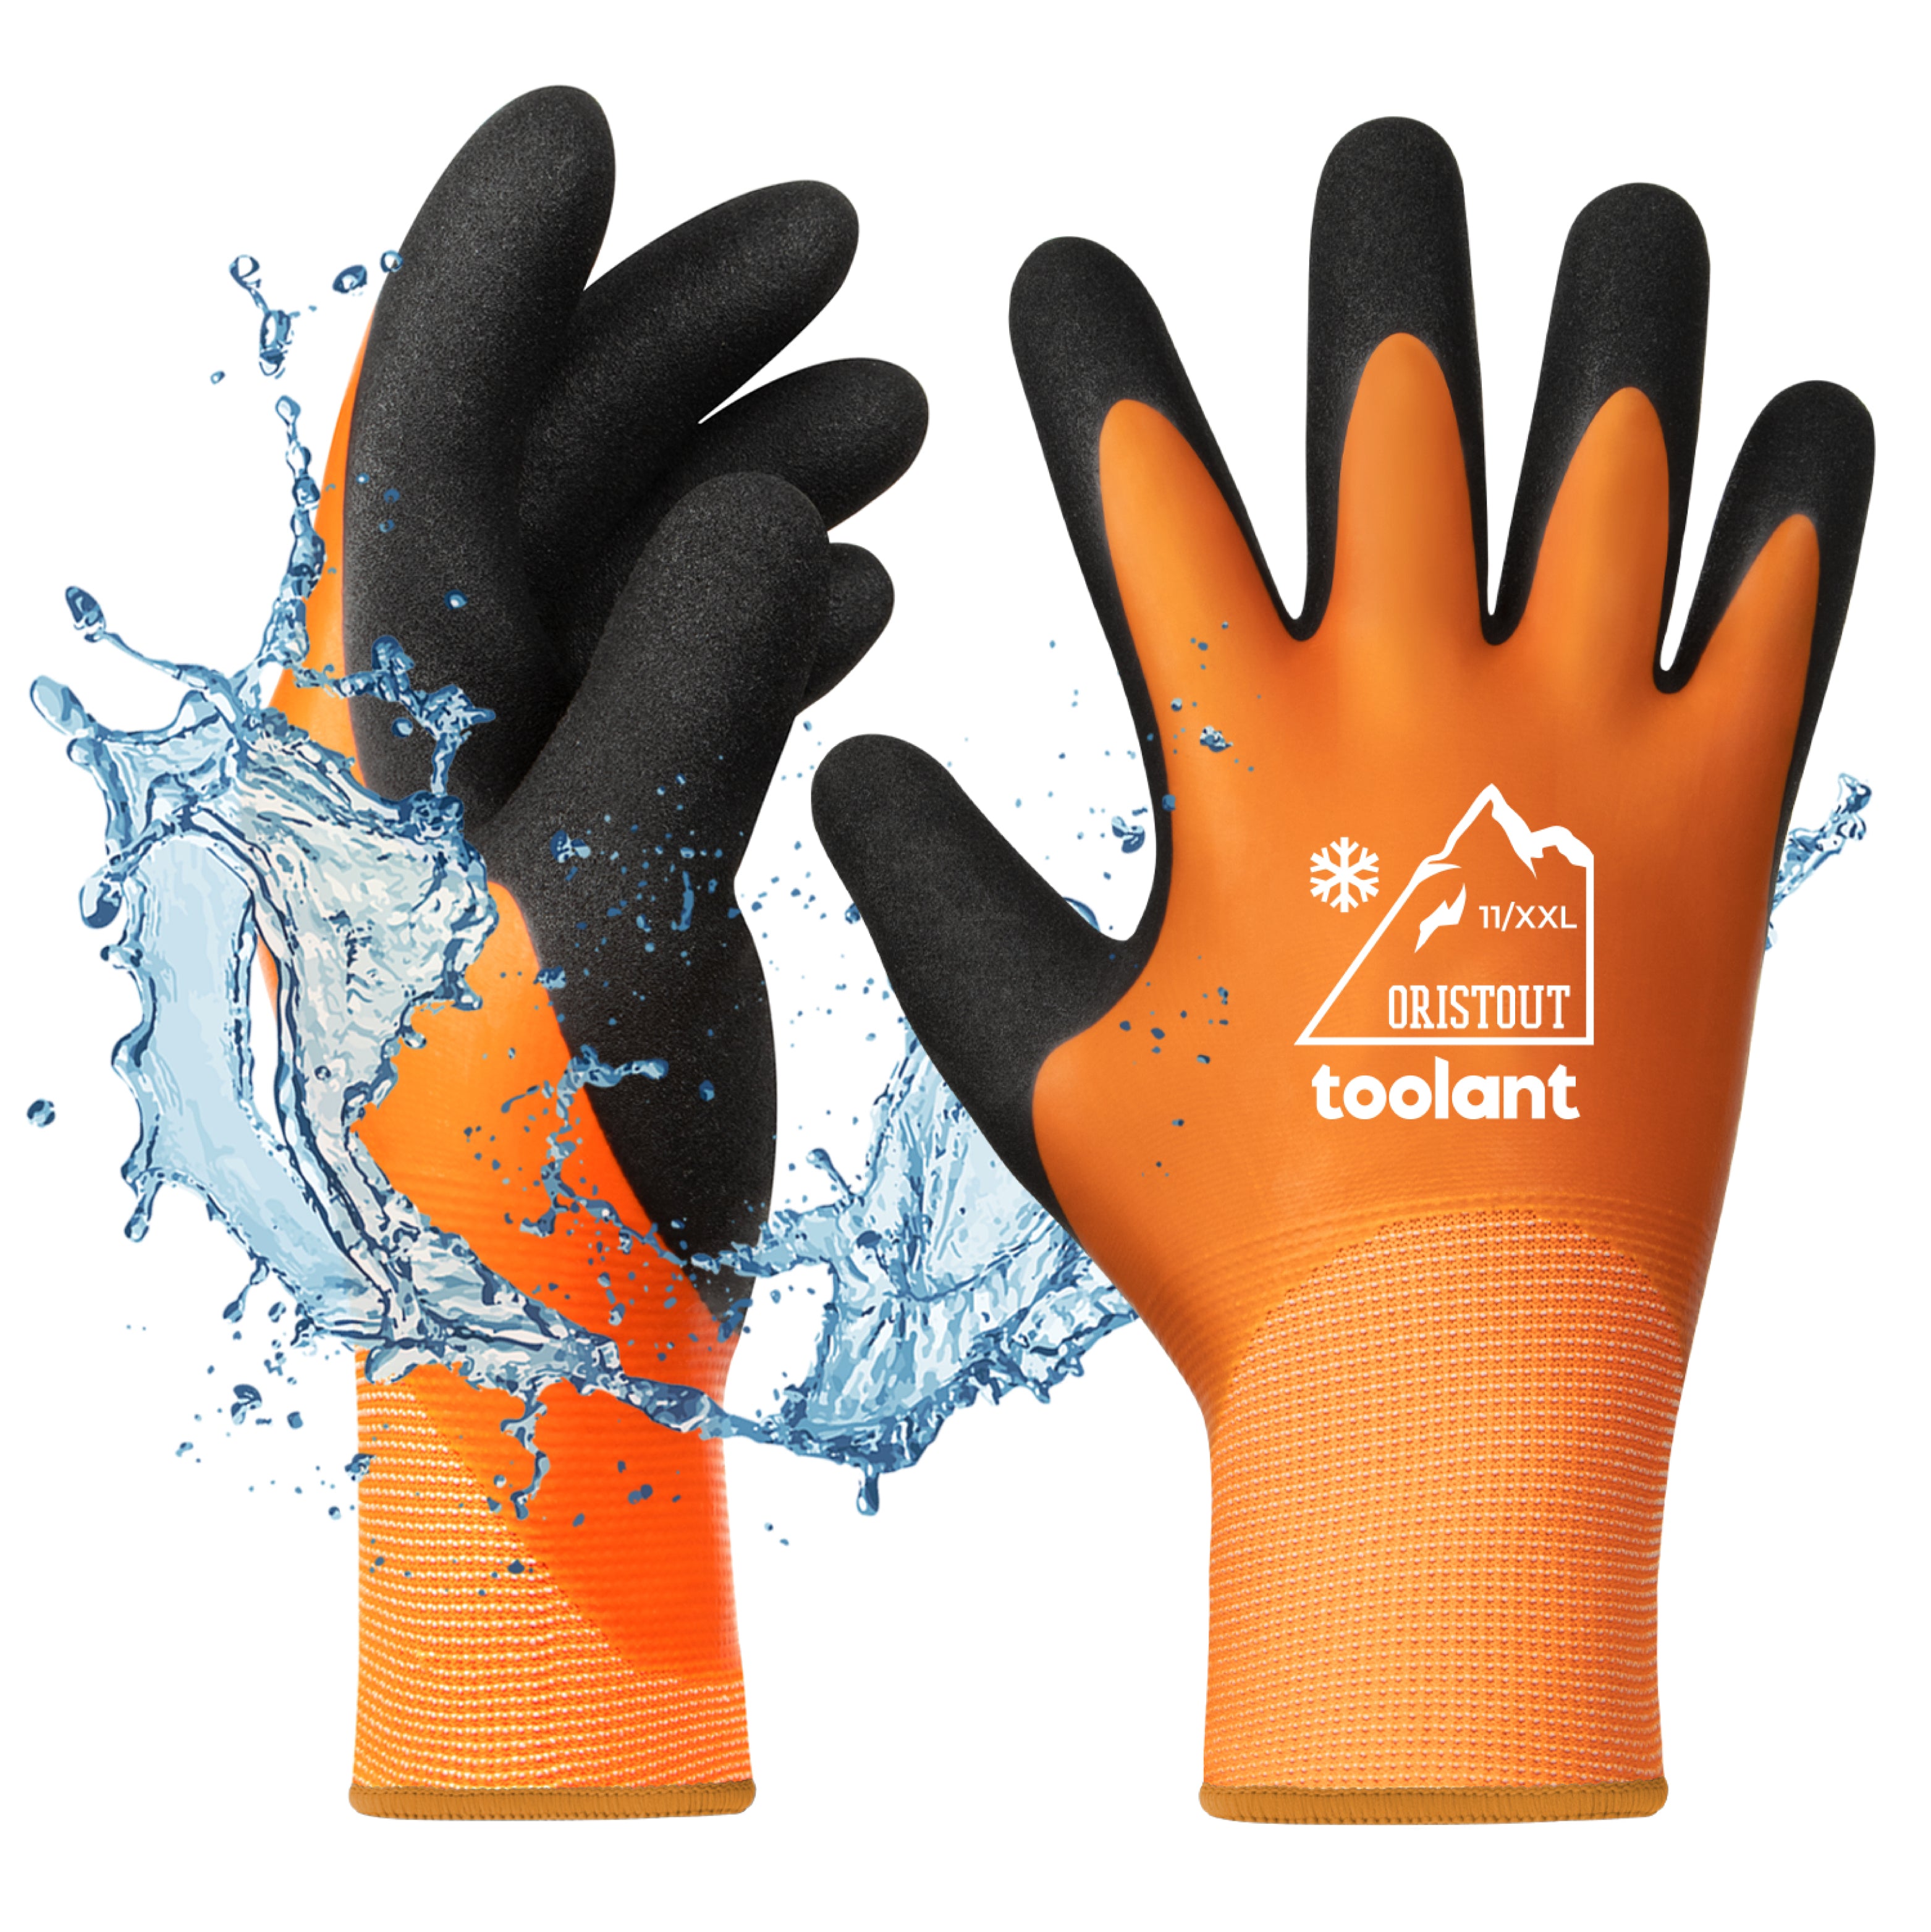 toolant Winter Gloves, 100% Waterproof, Gloves for Outdoor in Cold Weather